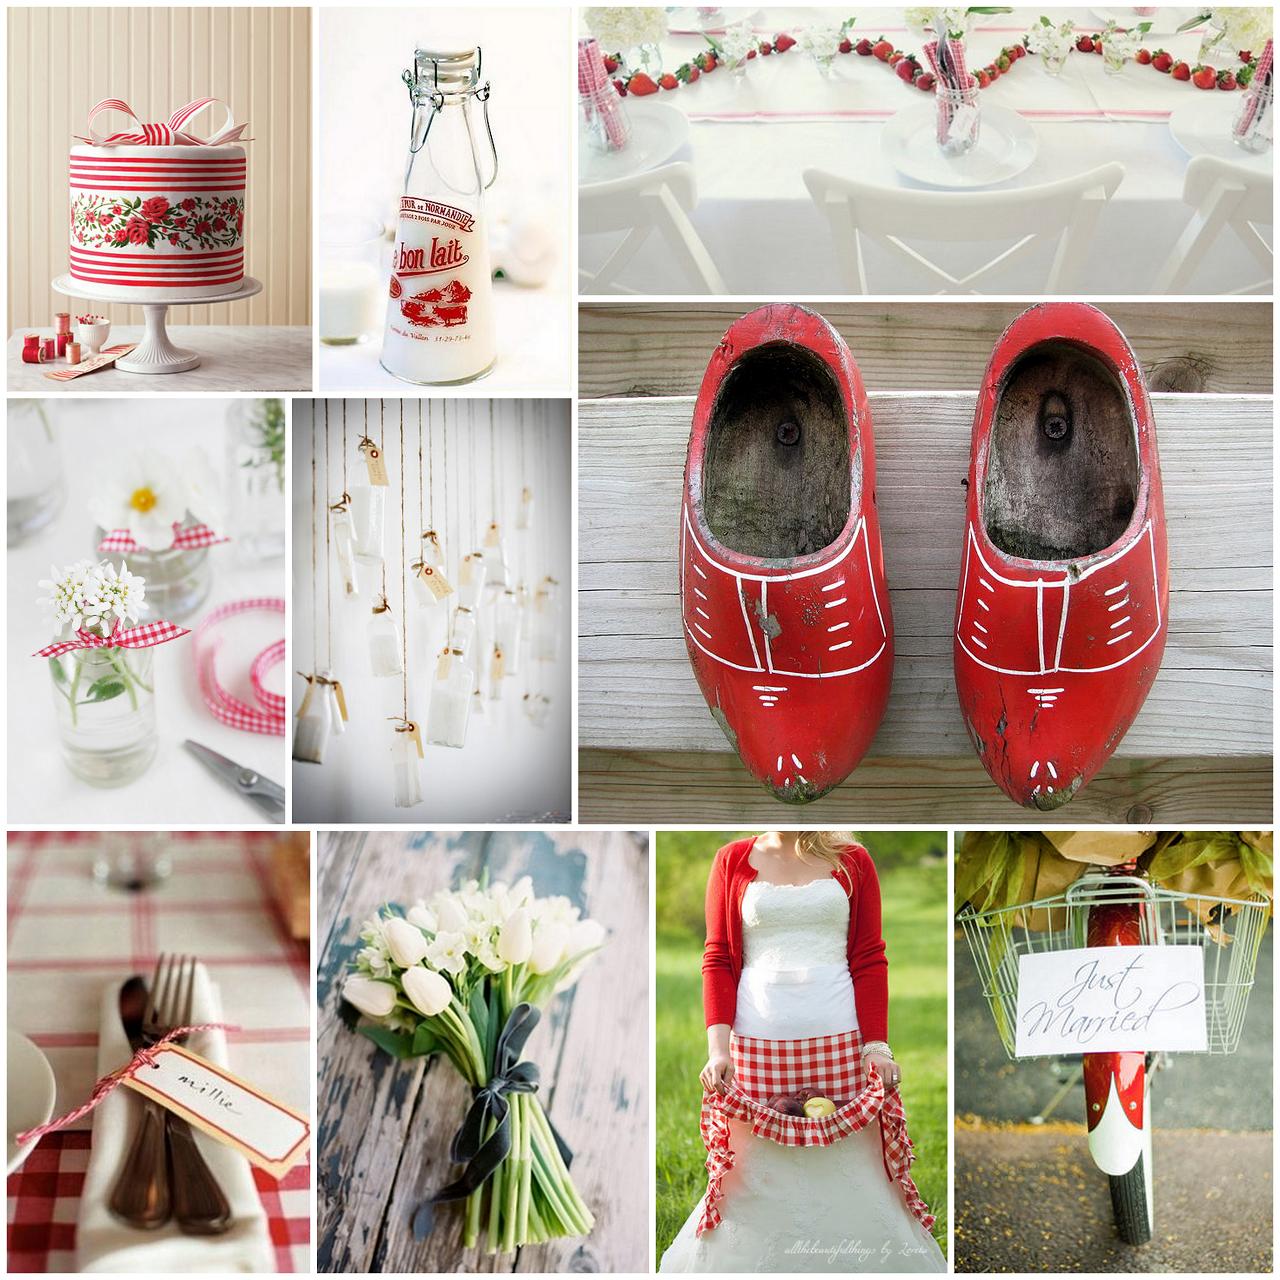 wedding cake pictures with strawberries 103} strawberries & dutch gingham